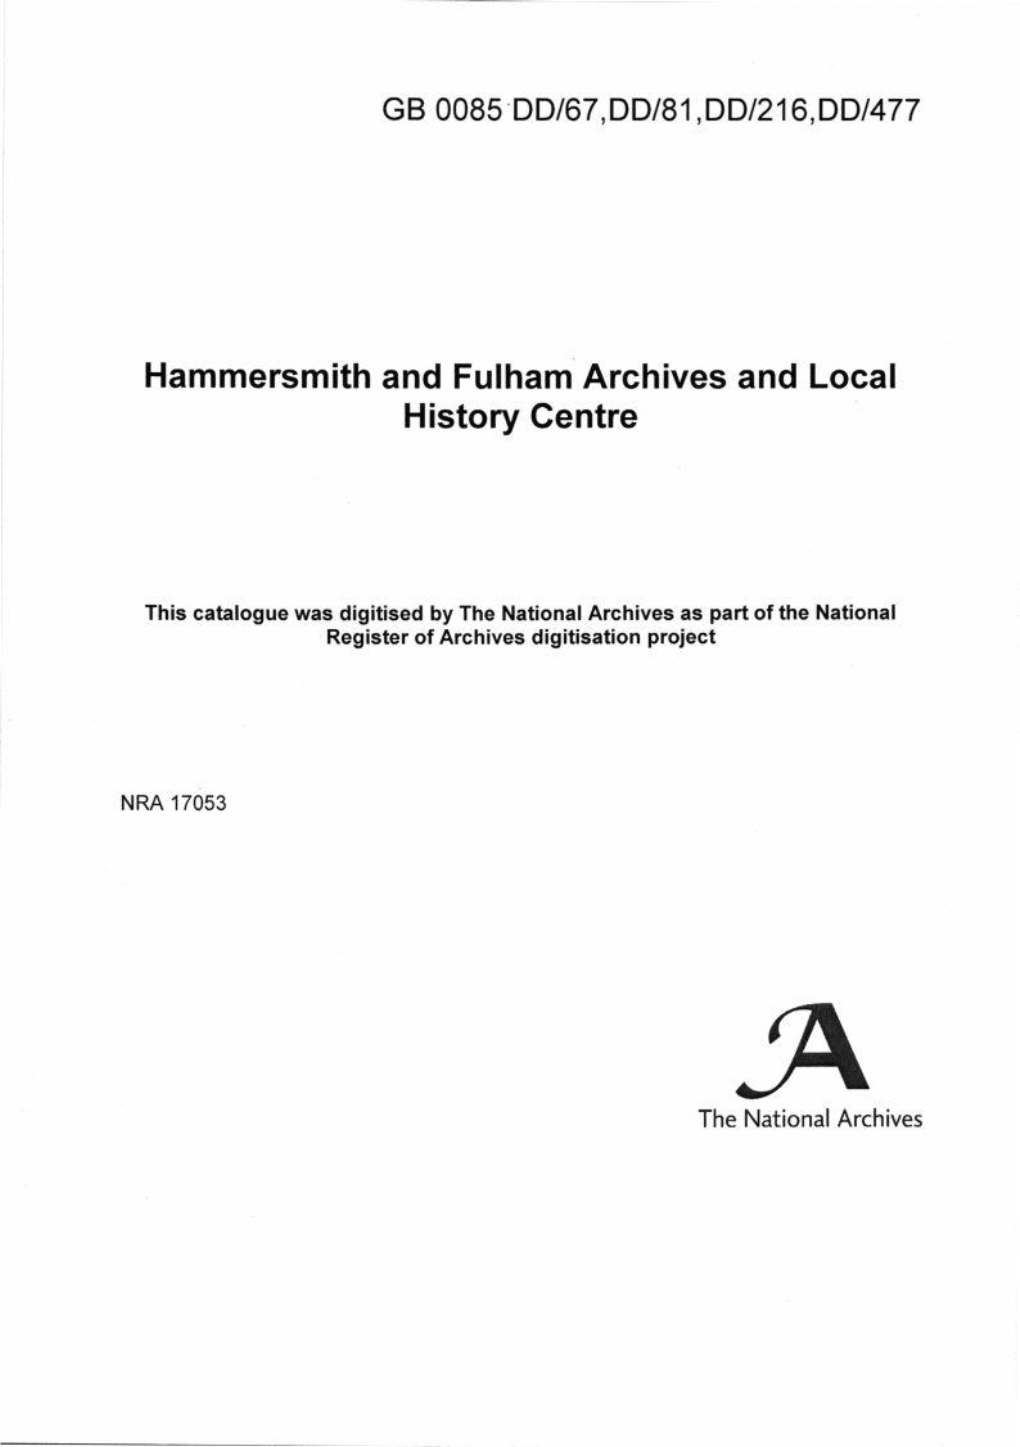 Hammersmith and Fulham Archives and Local History Centre